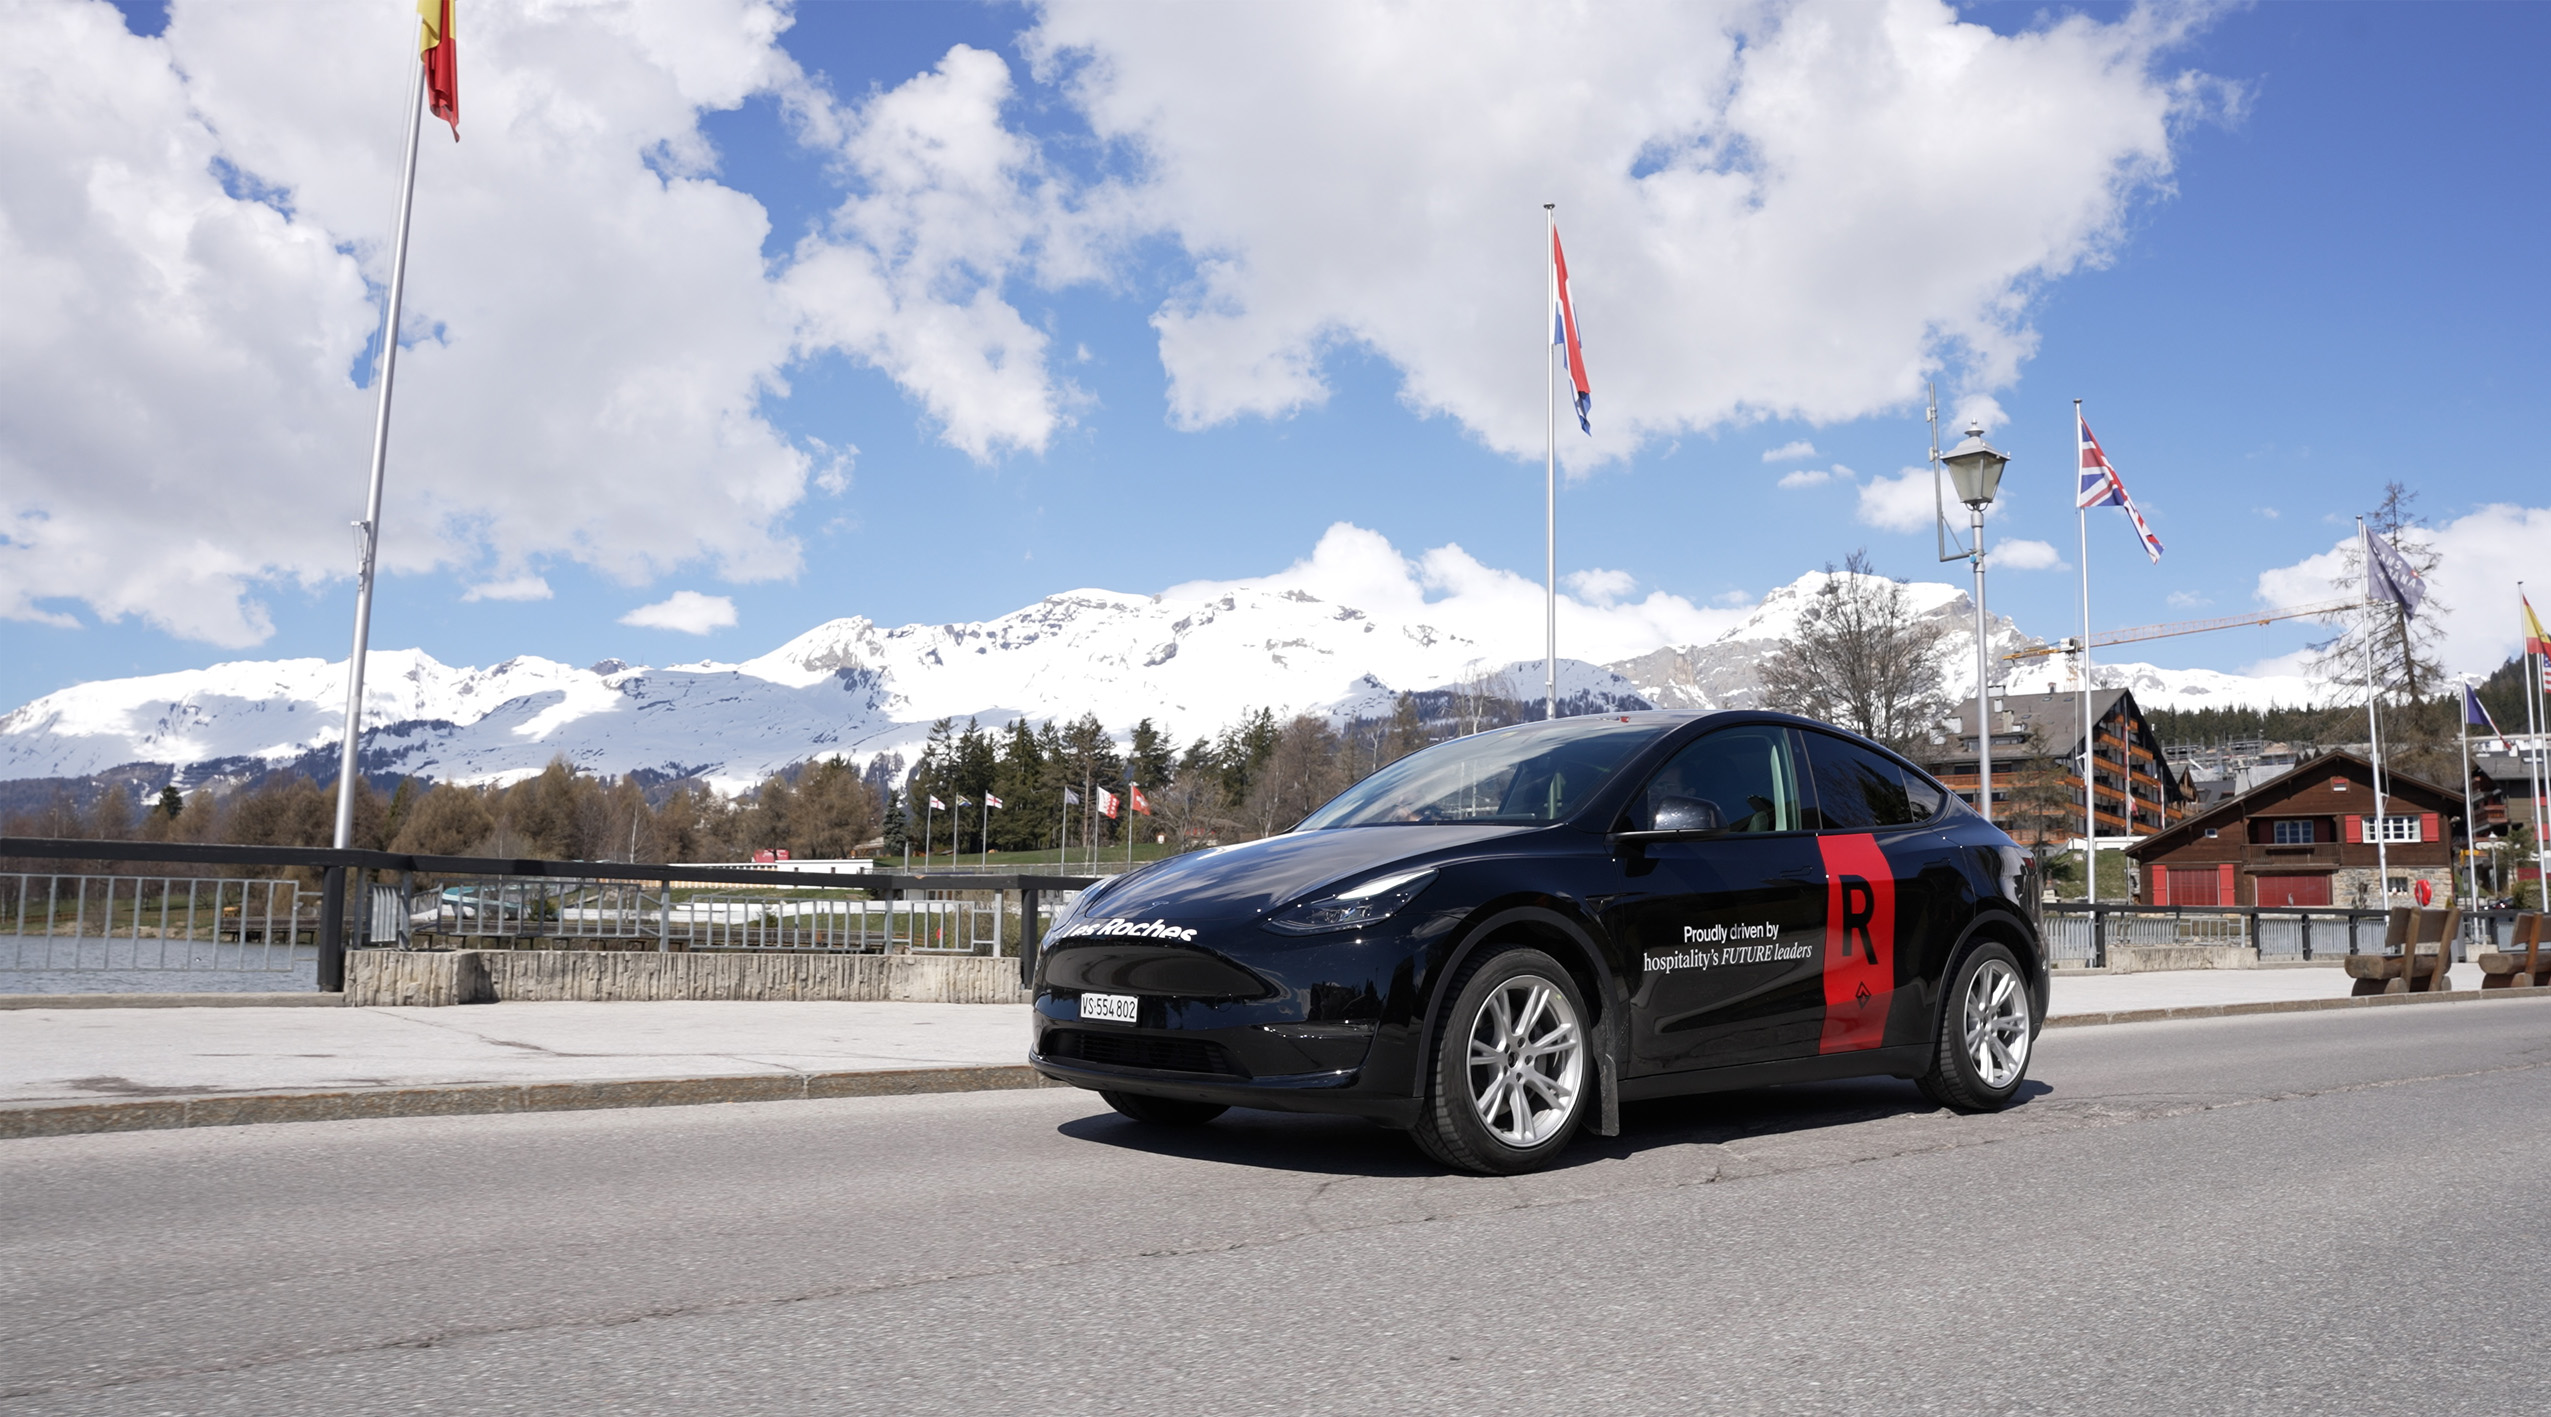 Electric dreams: sustainable student travel comes to Crans-Montana!